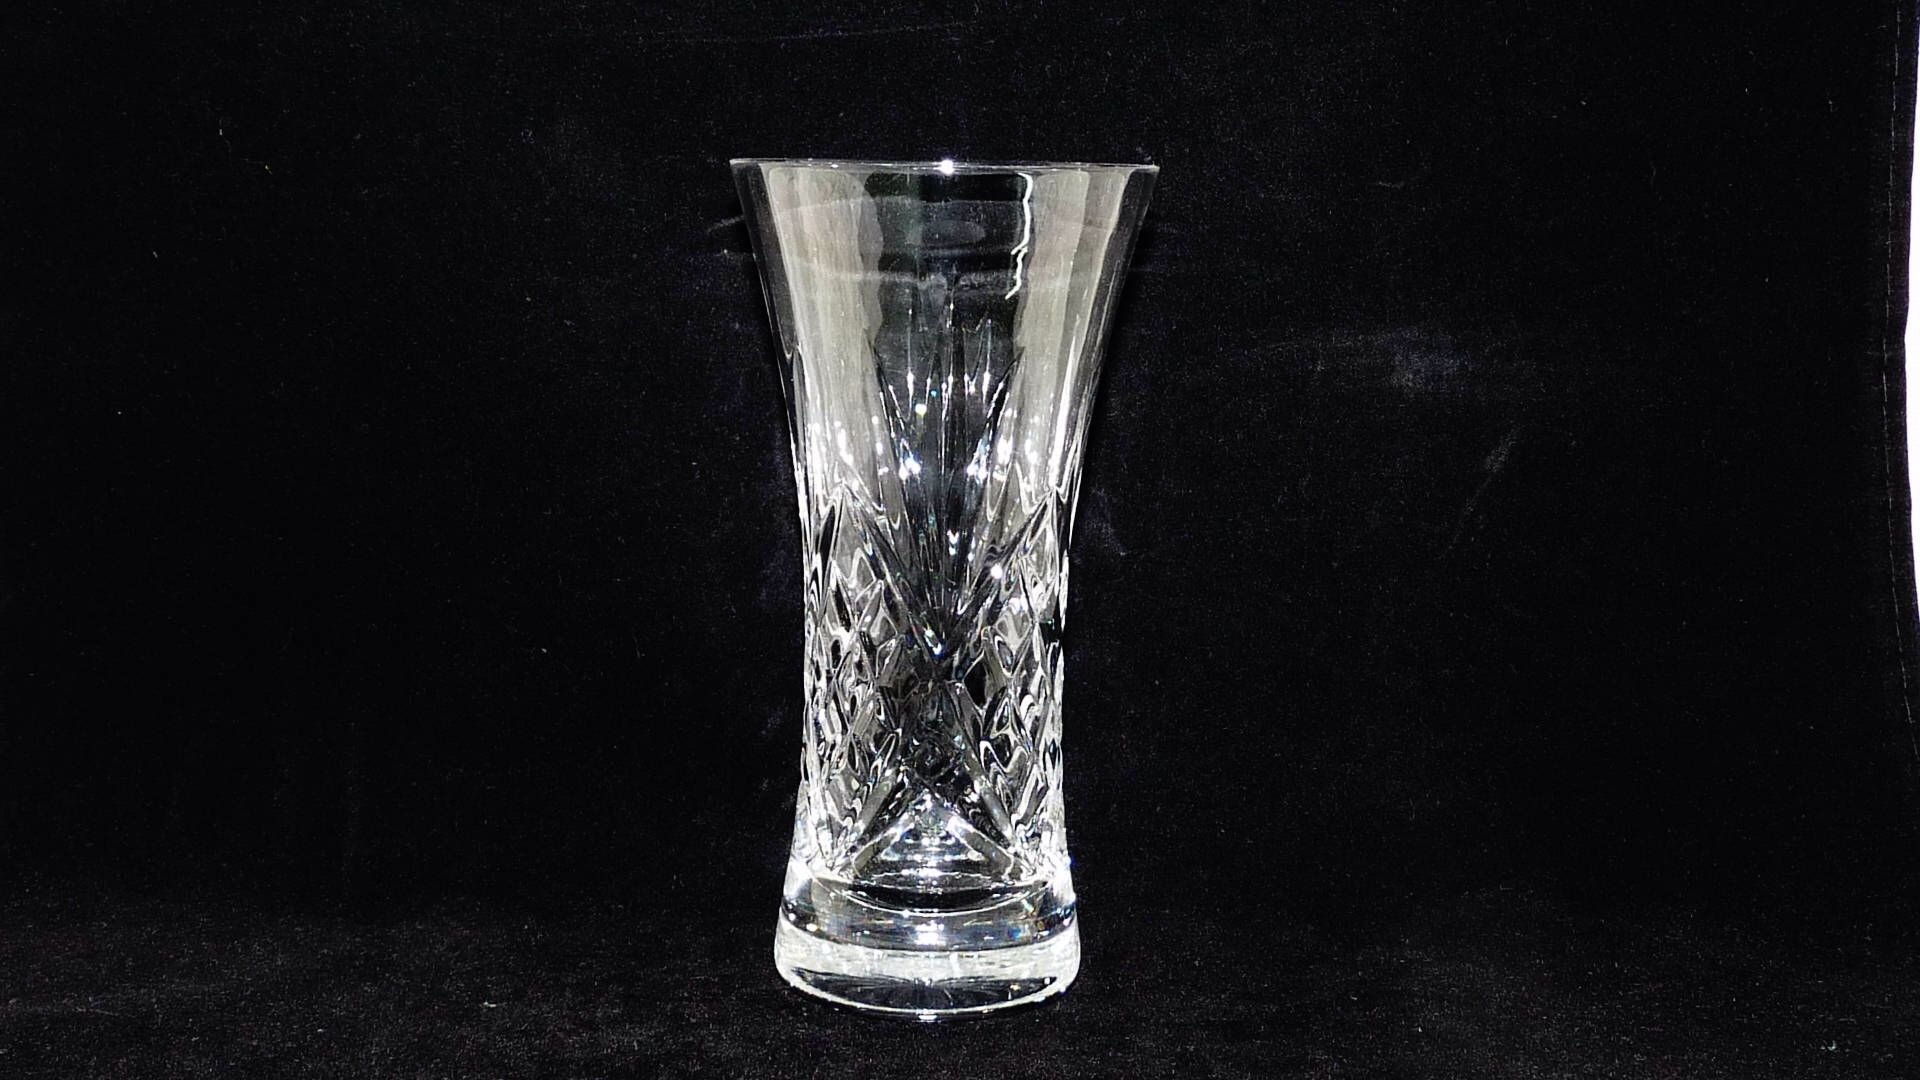 10 Fantastic Tiny Glass Bud Vases 2024 free download tiny glass bud vases of excited to share the latest addition to my etsy shop small glass for excited to share the latest addition to my etsy shop small glass vase